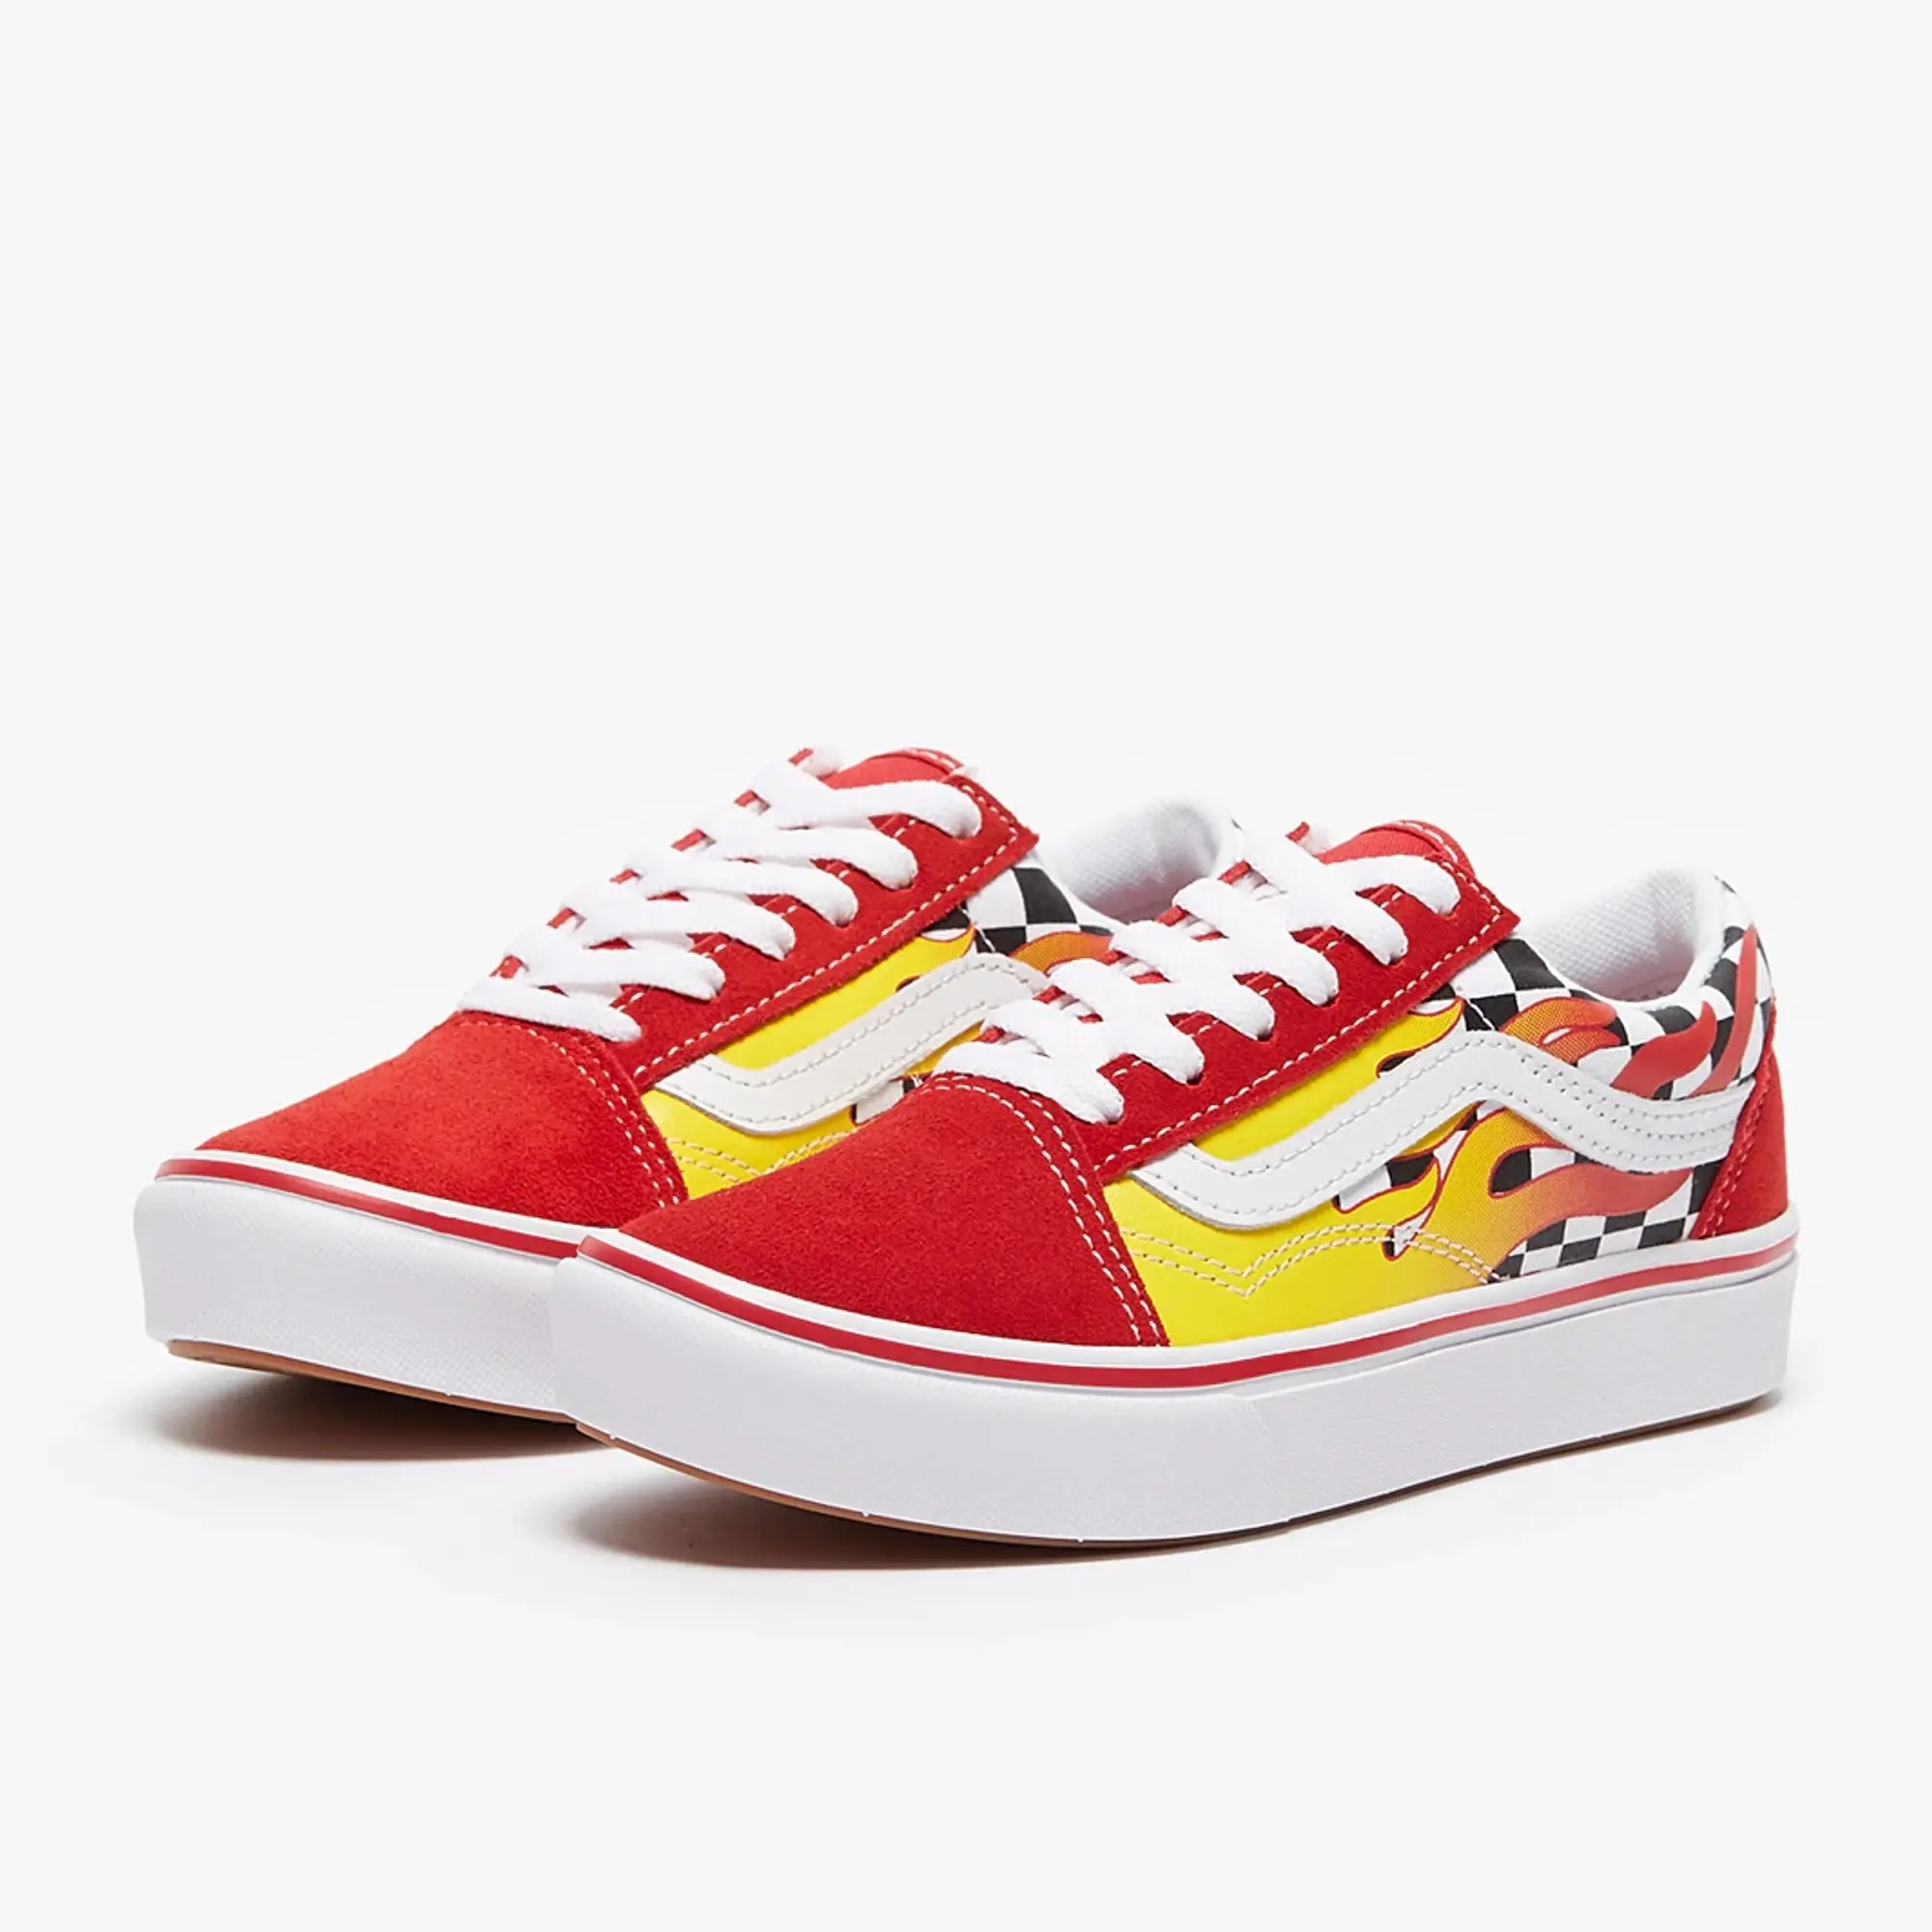 Vans Kids Flame Comfycush Old Skool Shoes (4-8 Years) ((Flame) Checkerboard/Red) Kids Red